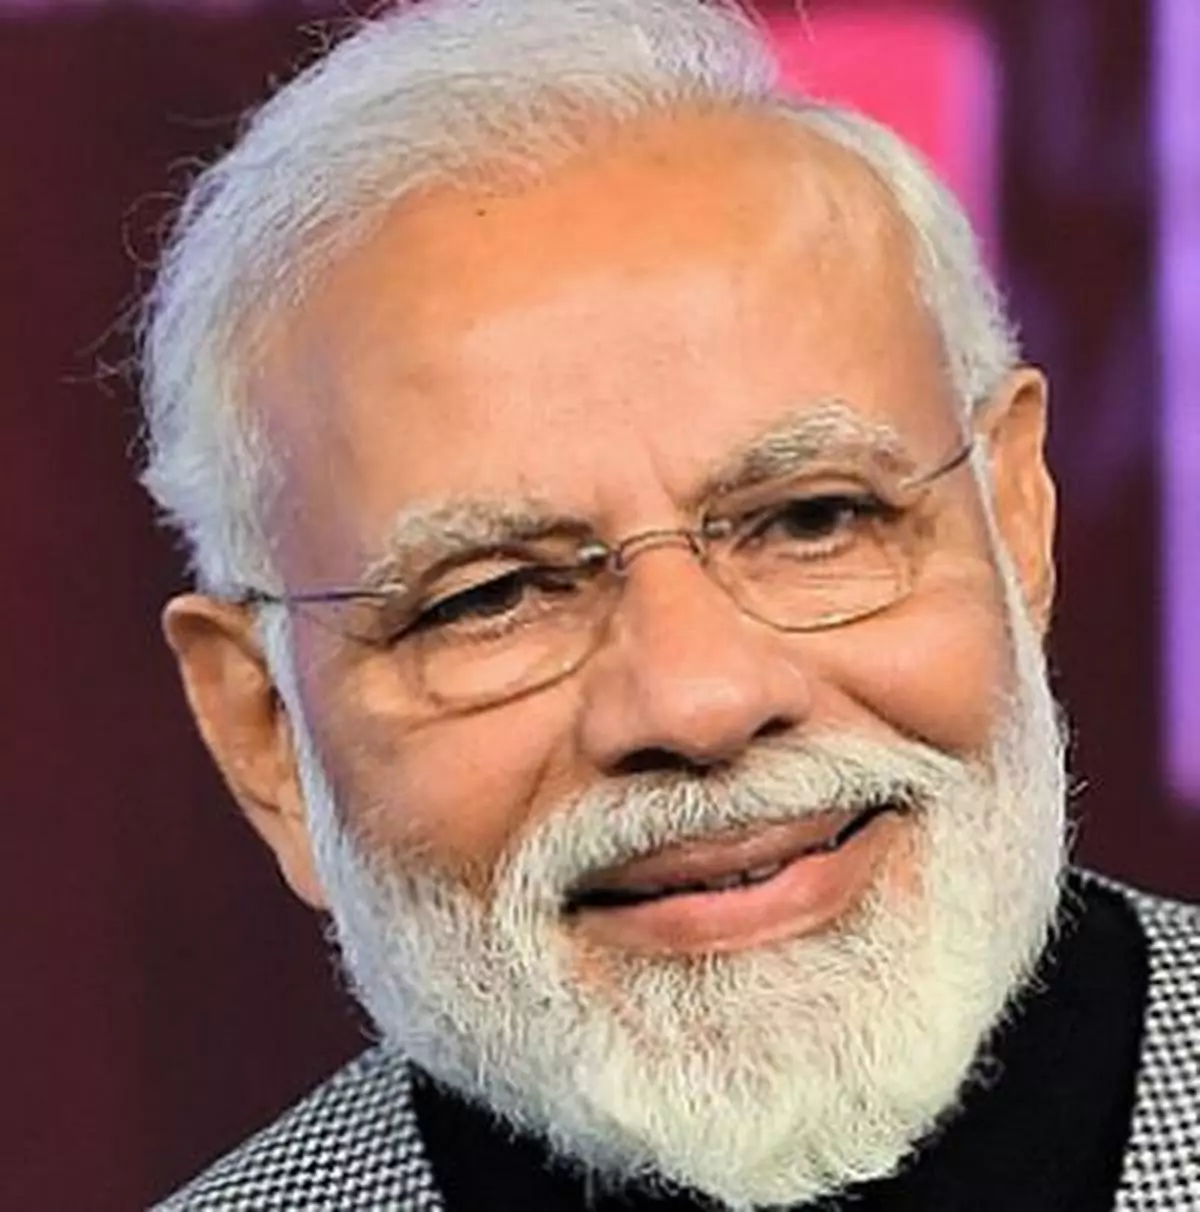 PM Narendra Modi's Interaction With Chowkidars 'A Fraud', Says